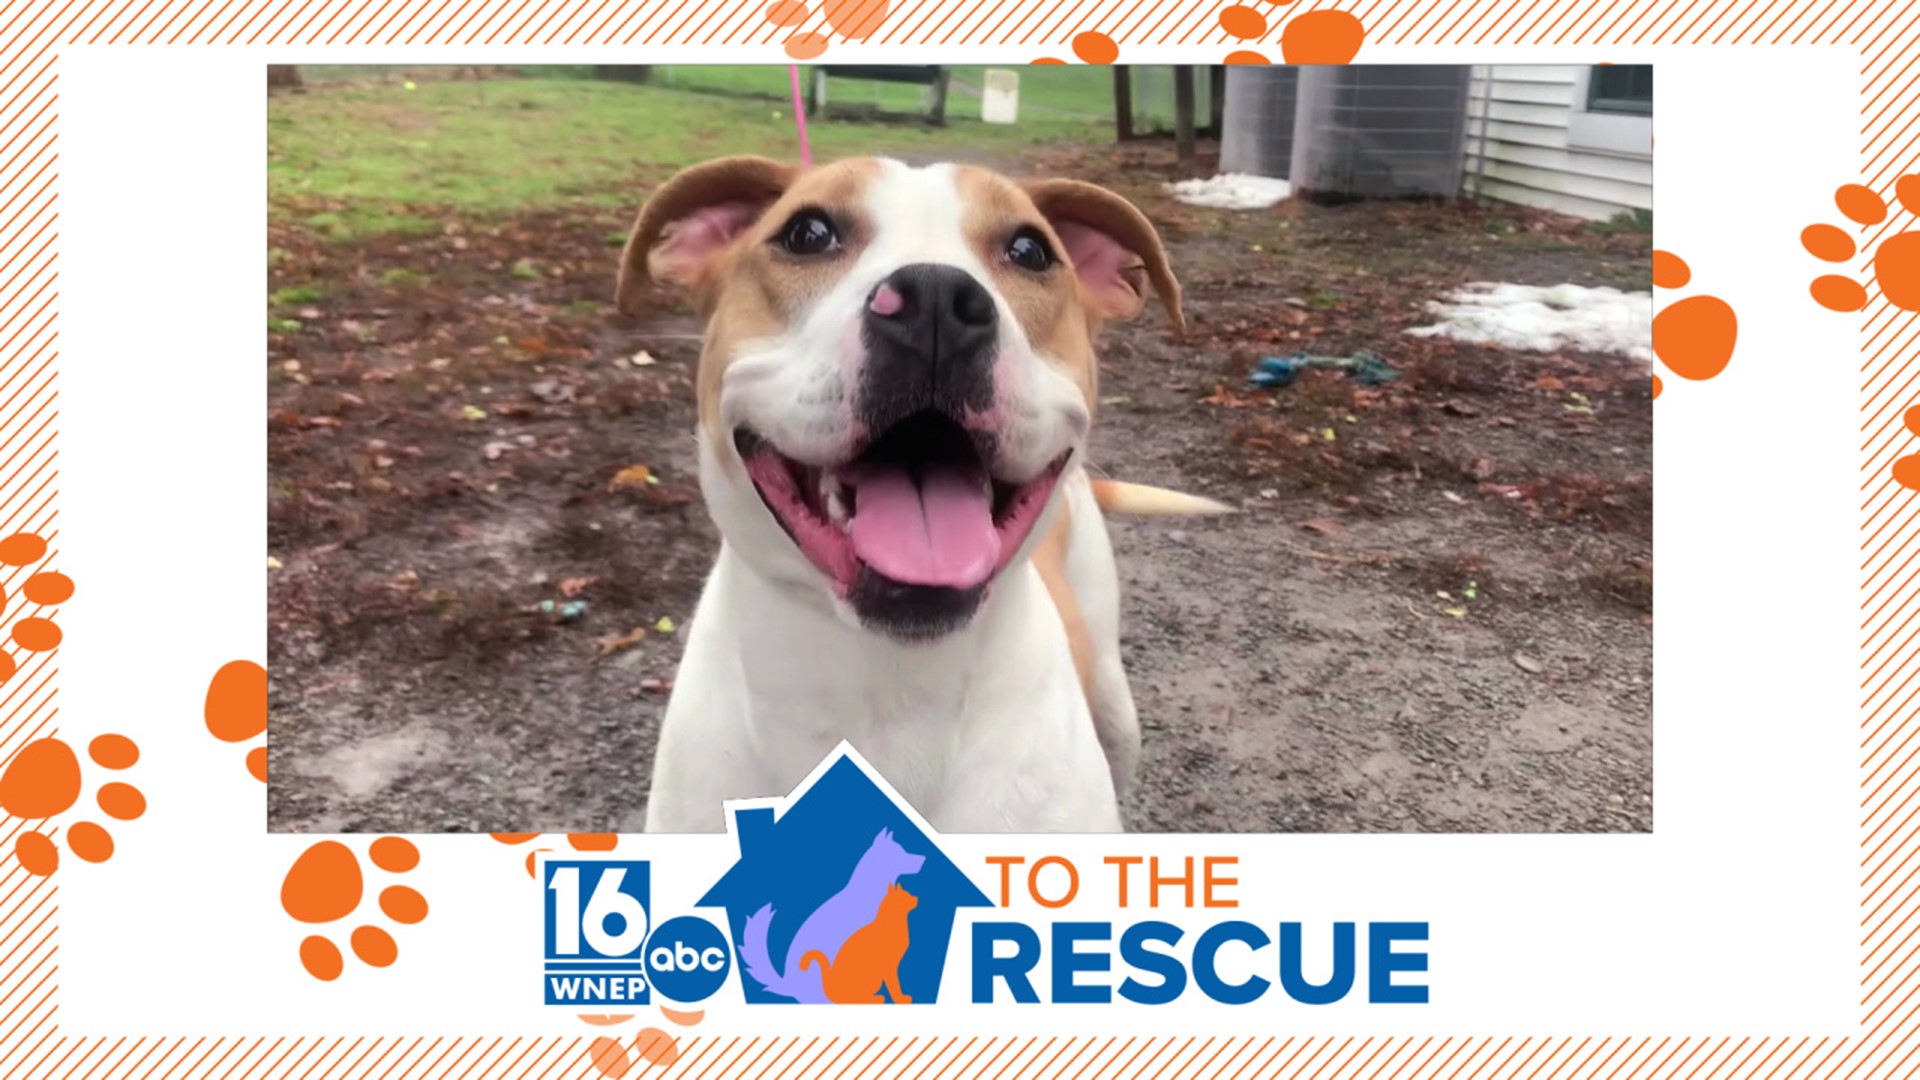 In this week's 16 To The Rescue, we meet a 1-year-old boxer/mix who was left tied to a tree. Rescue workers saved her and now want to find her a forever home.